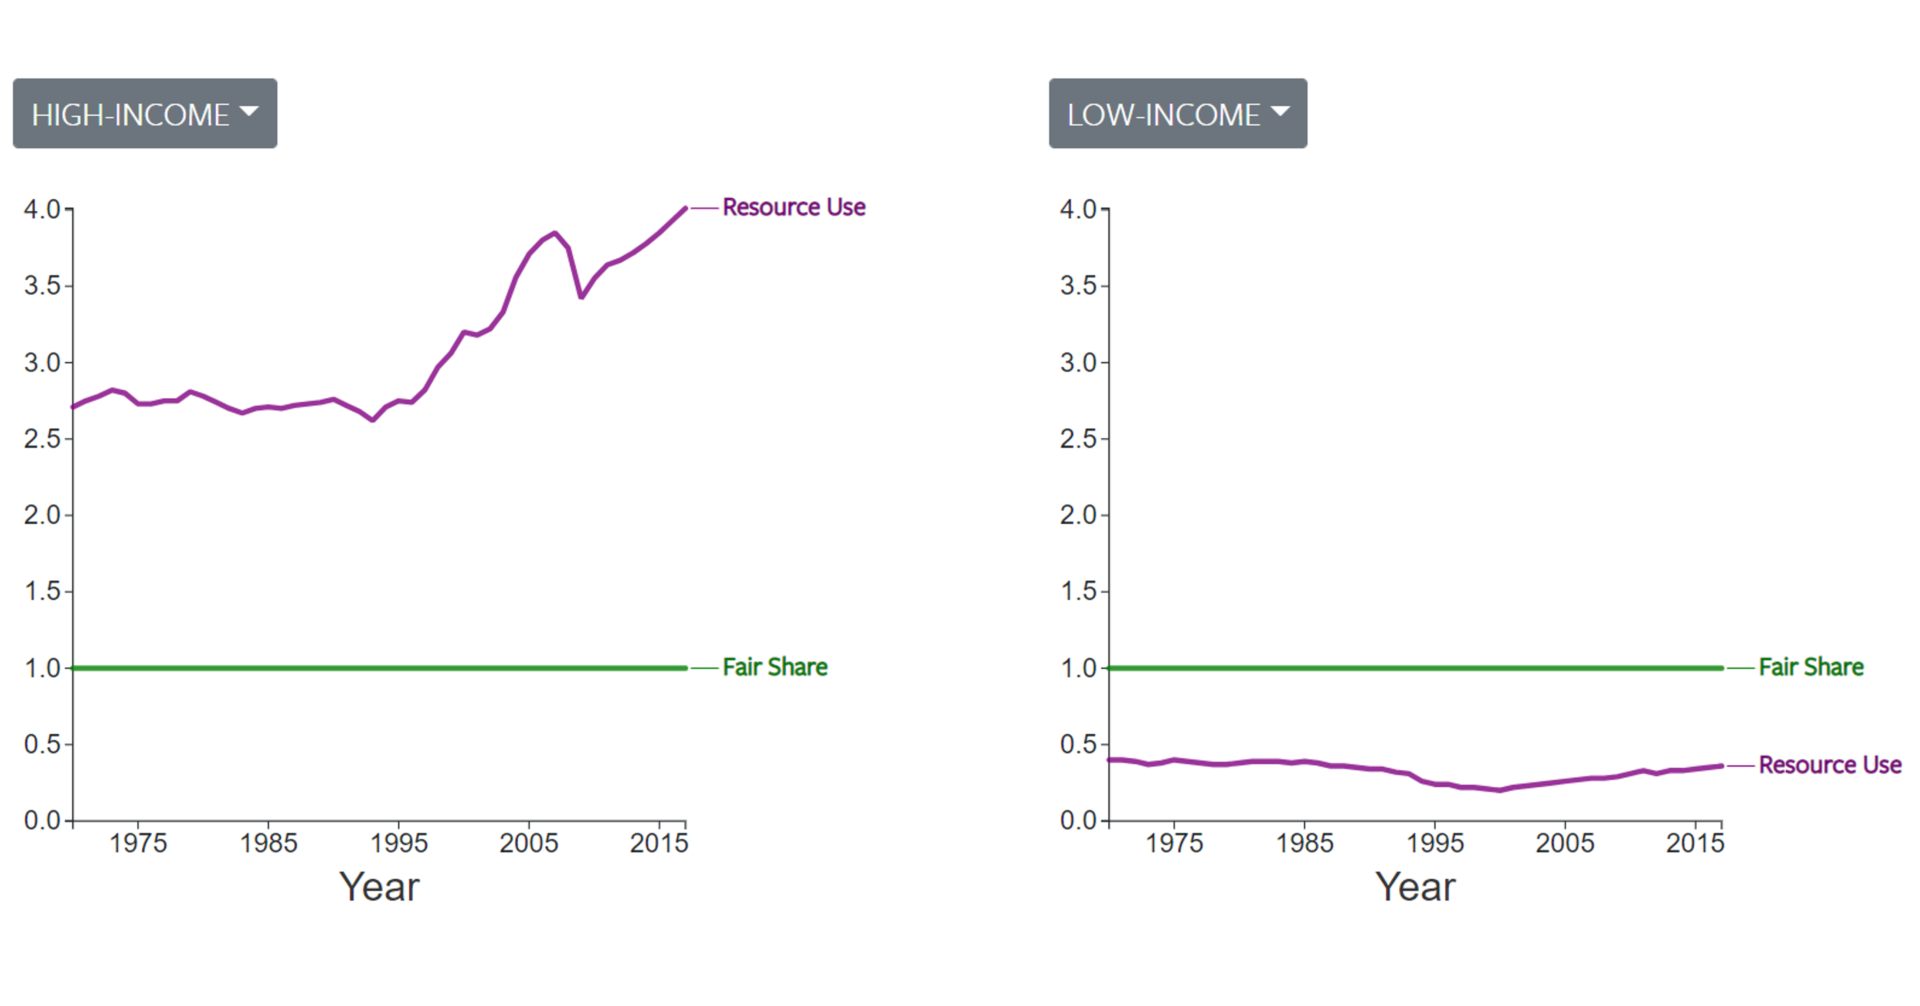 High-income and low-income line charts